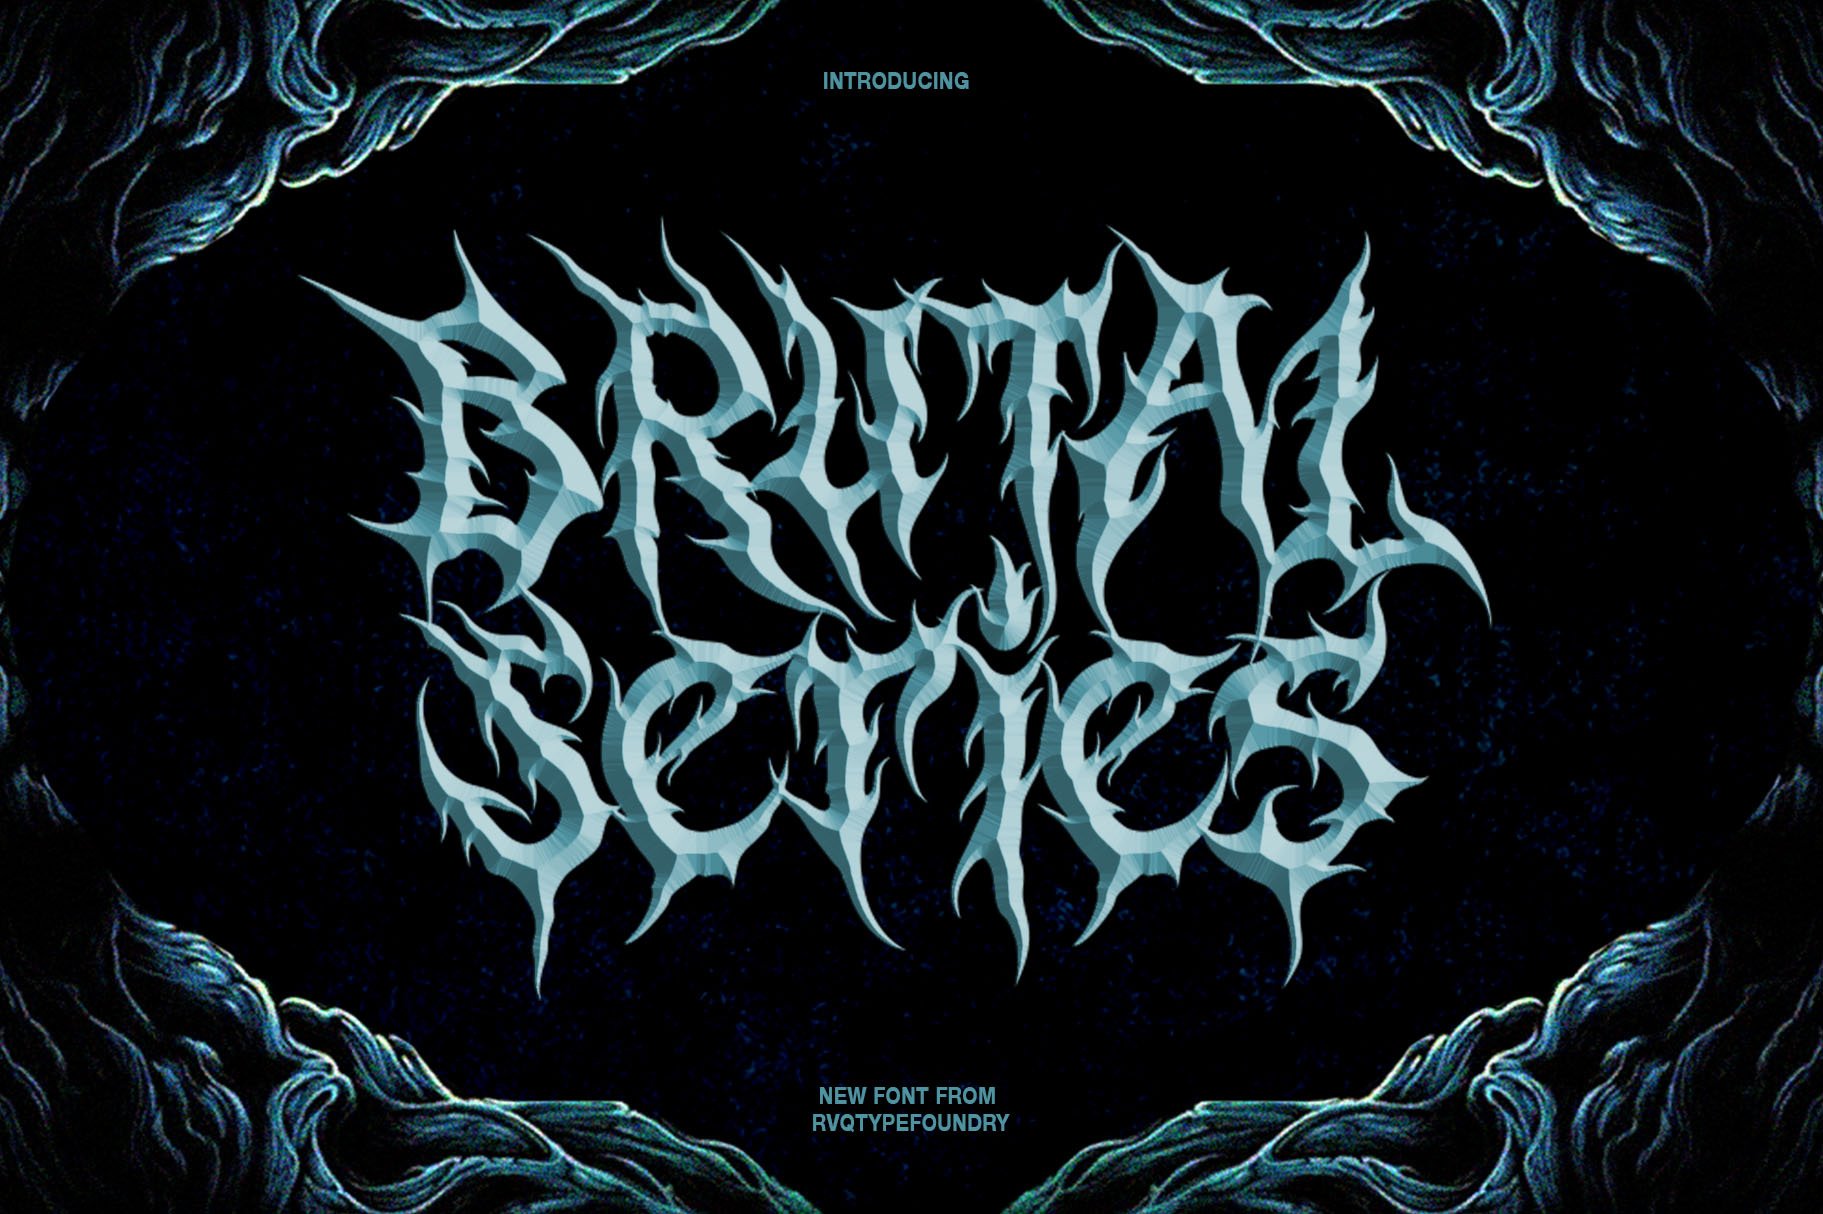 Brutal series (intro sale) cover image.